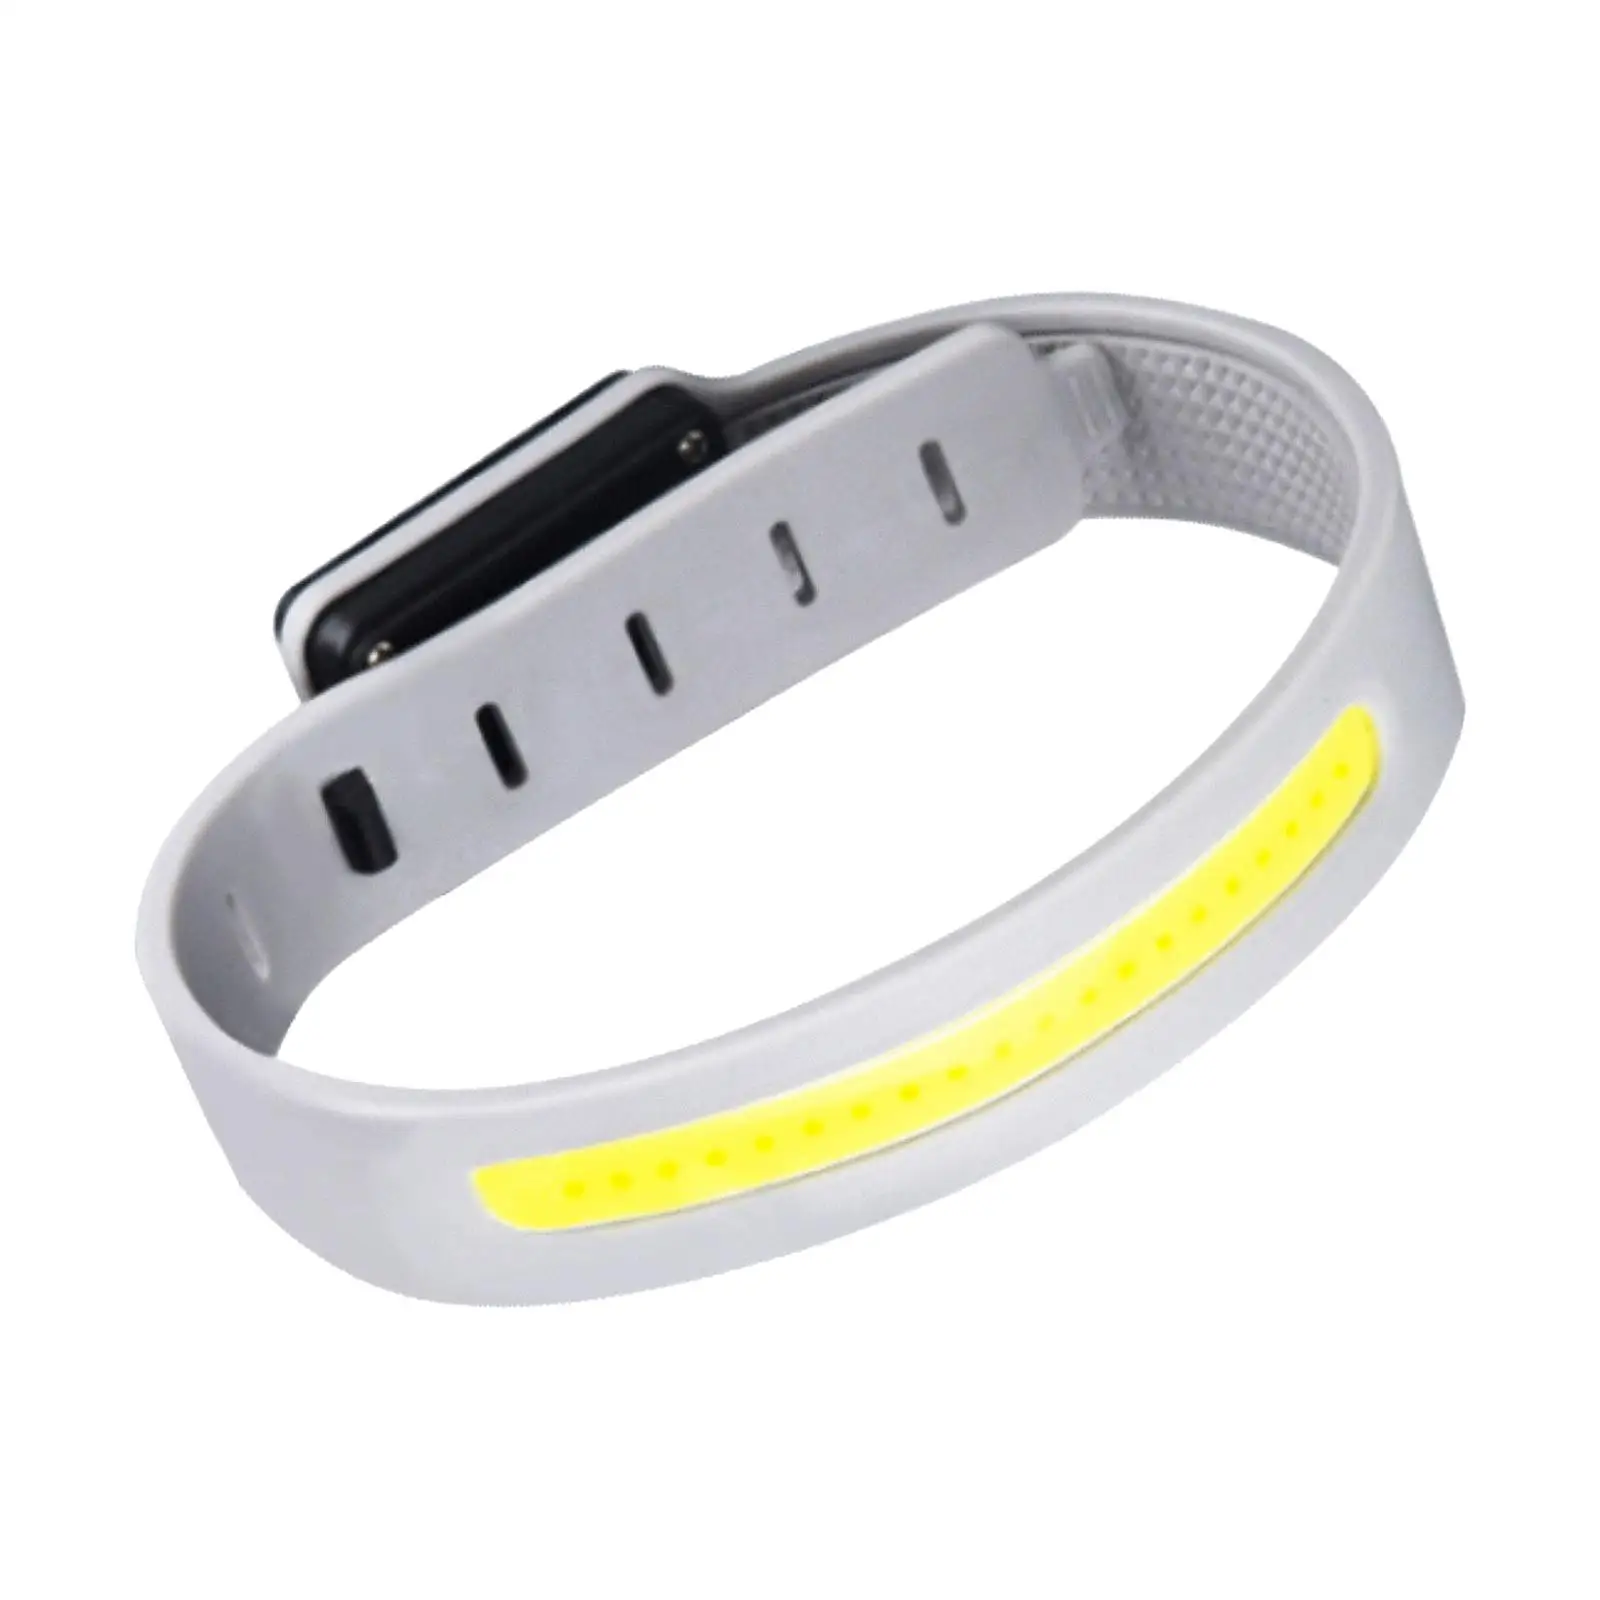 Light up Armband Rechargeable Strap Wearable Sports Wristband Safety Light for Runners for Cycling Night Running Walking Hiking